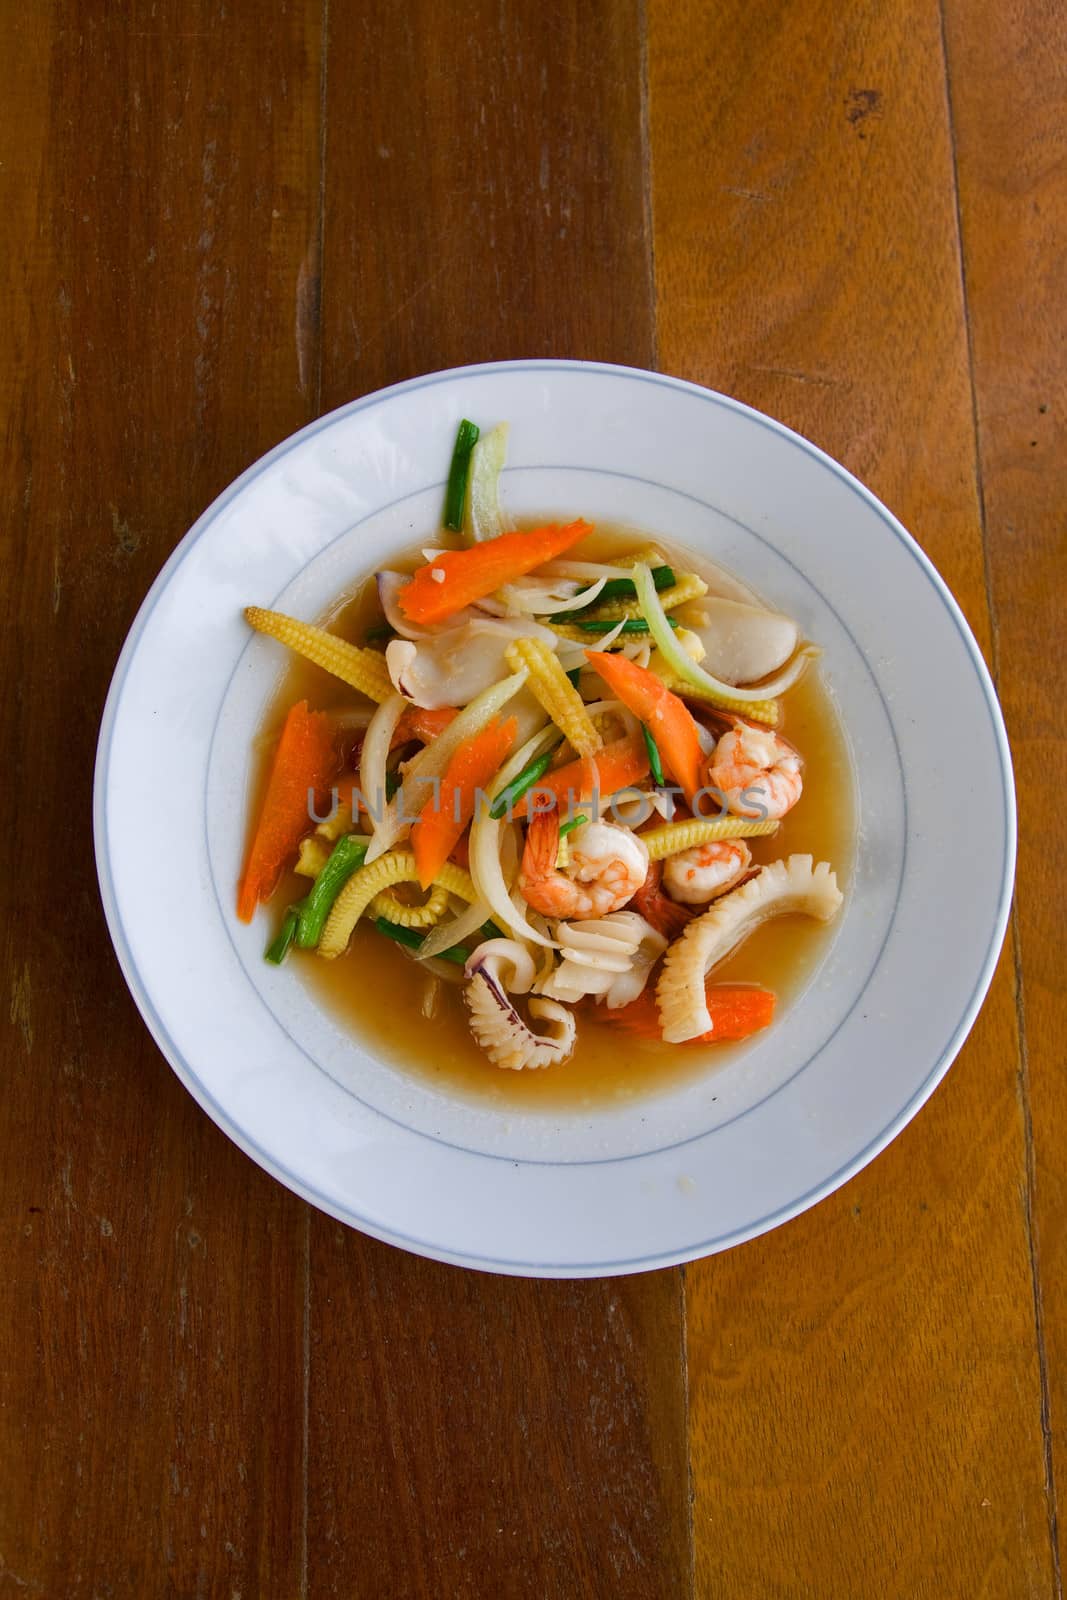  fry vegetables with seafood  by foryouinf